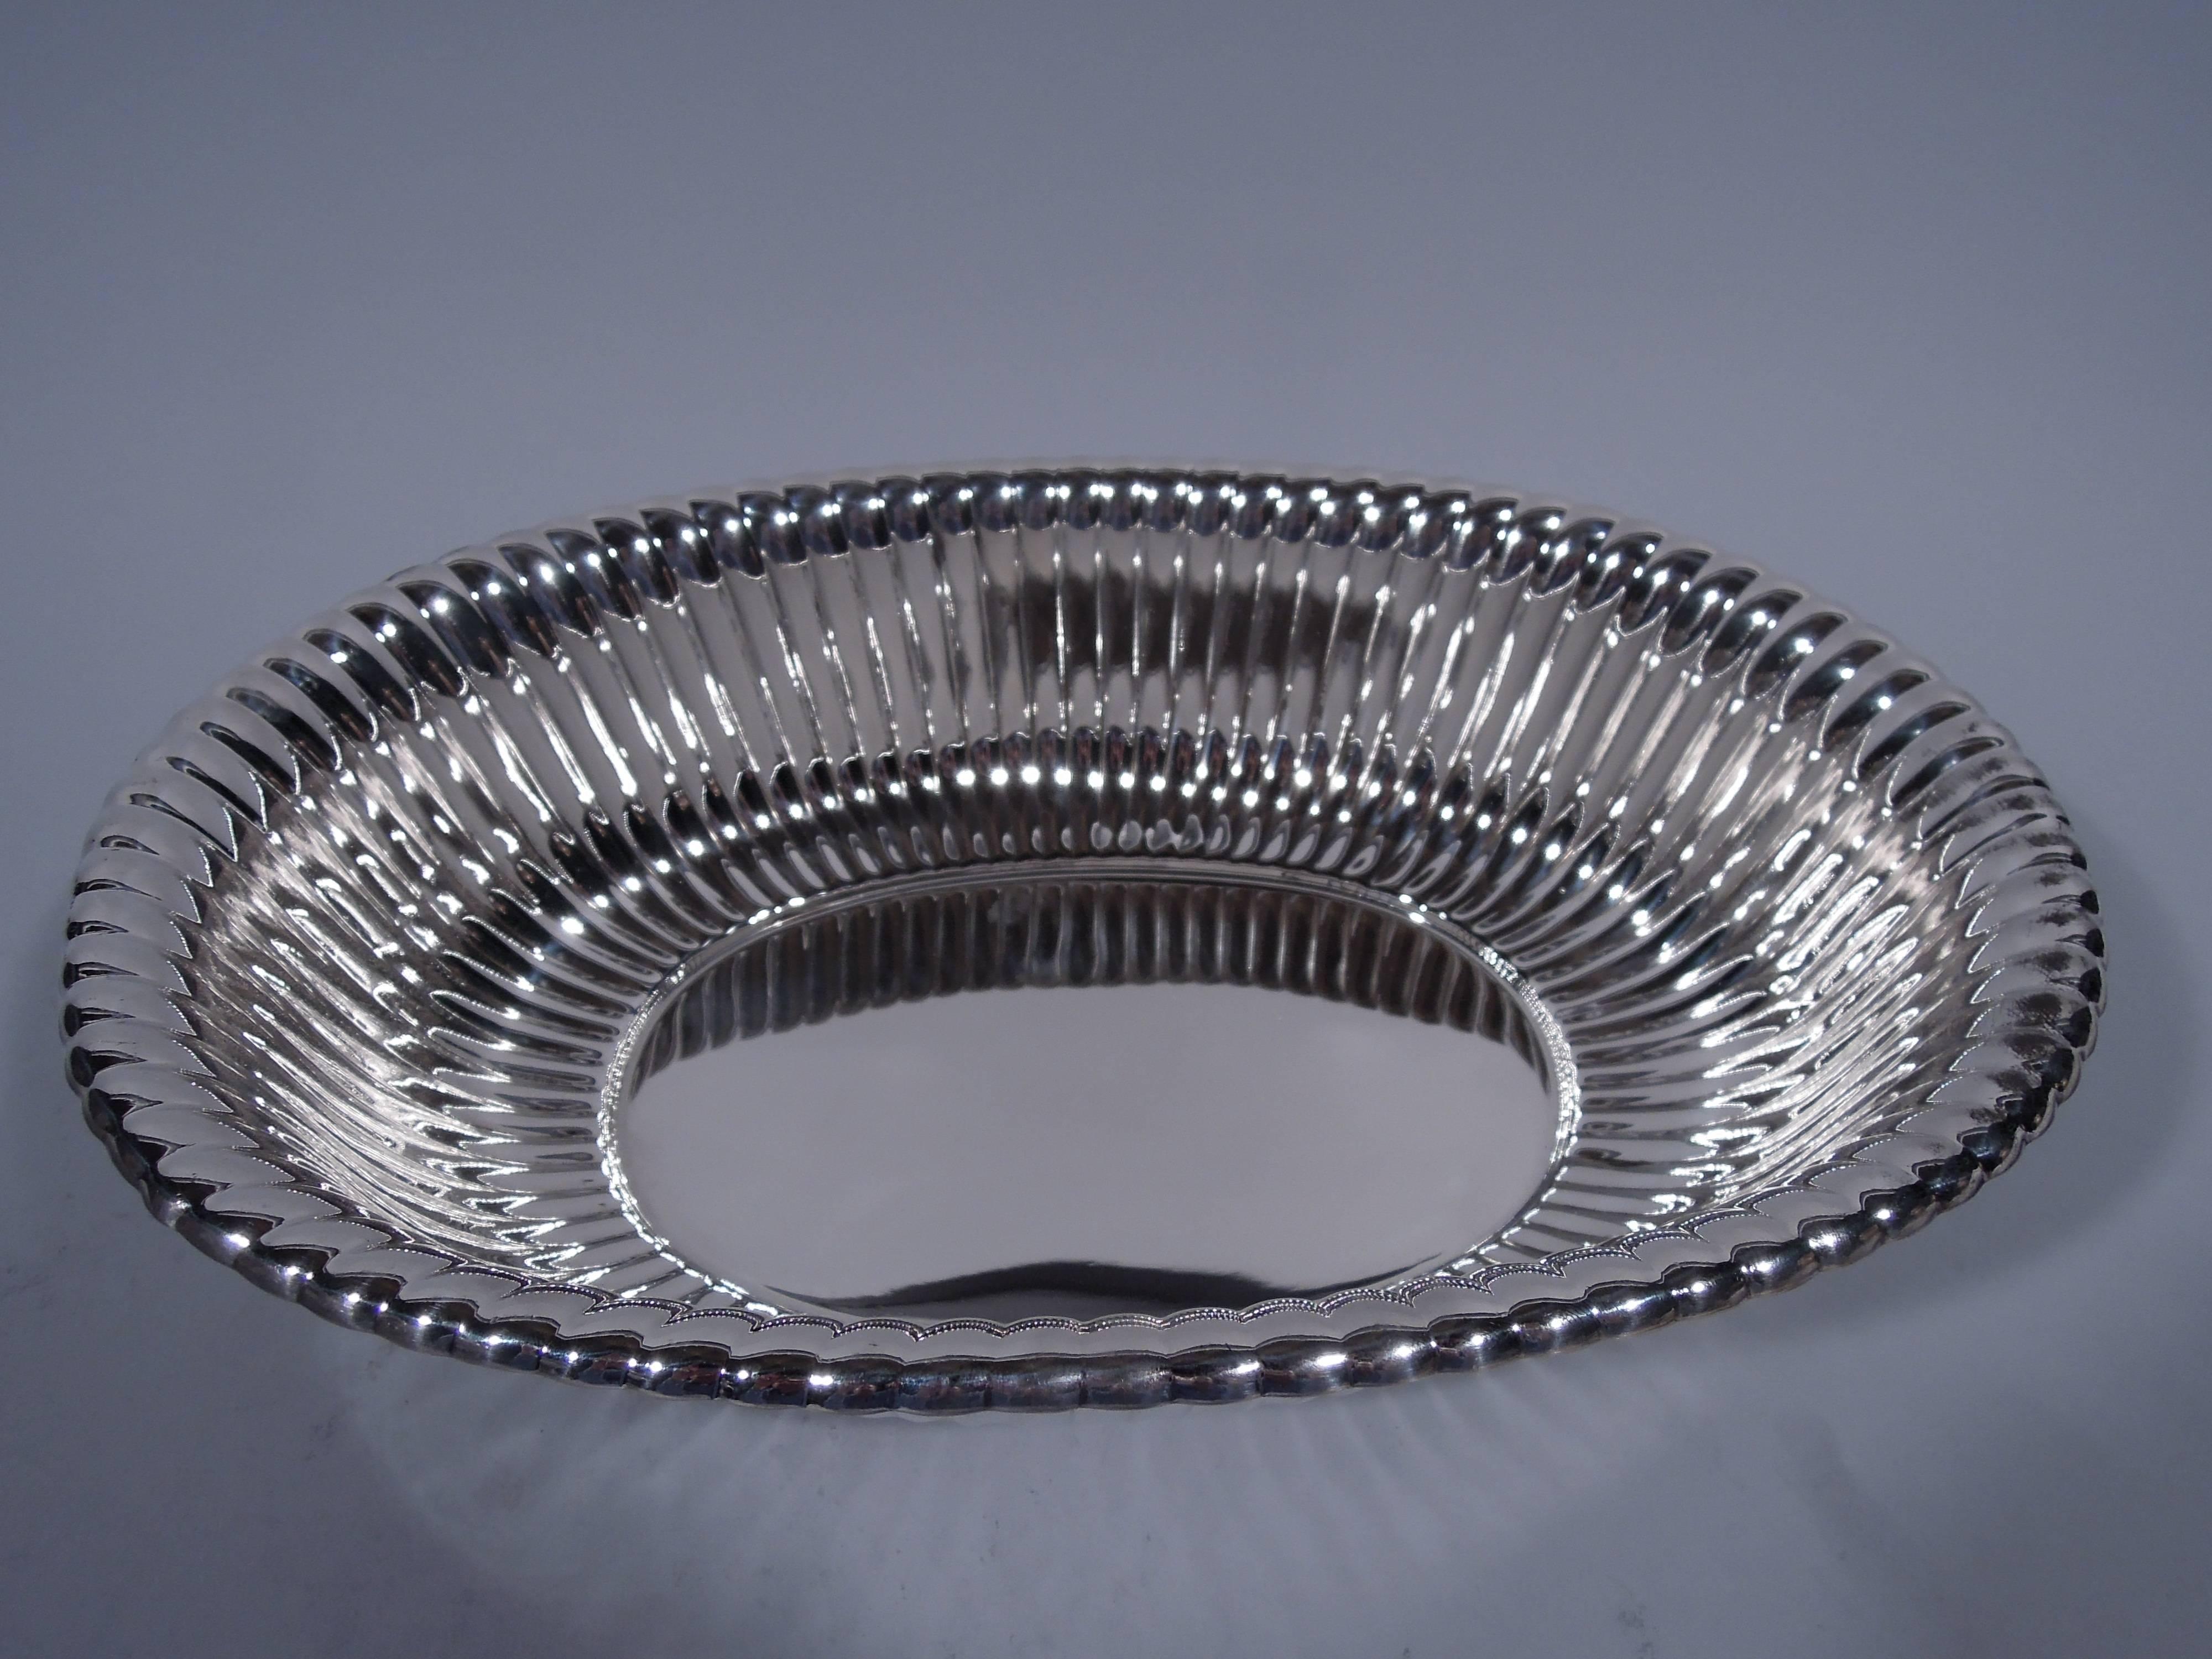 Modern sterling silver bowl. Made by Reed & Barton in Taunton, Massachusetts in 1948. Plain oval well, curved sides, flared rim and short foot. Sides exterior have slanted flutes. Dynamic and tactile. Hallmark includes date symbol and no. X369.